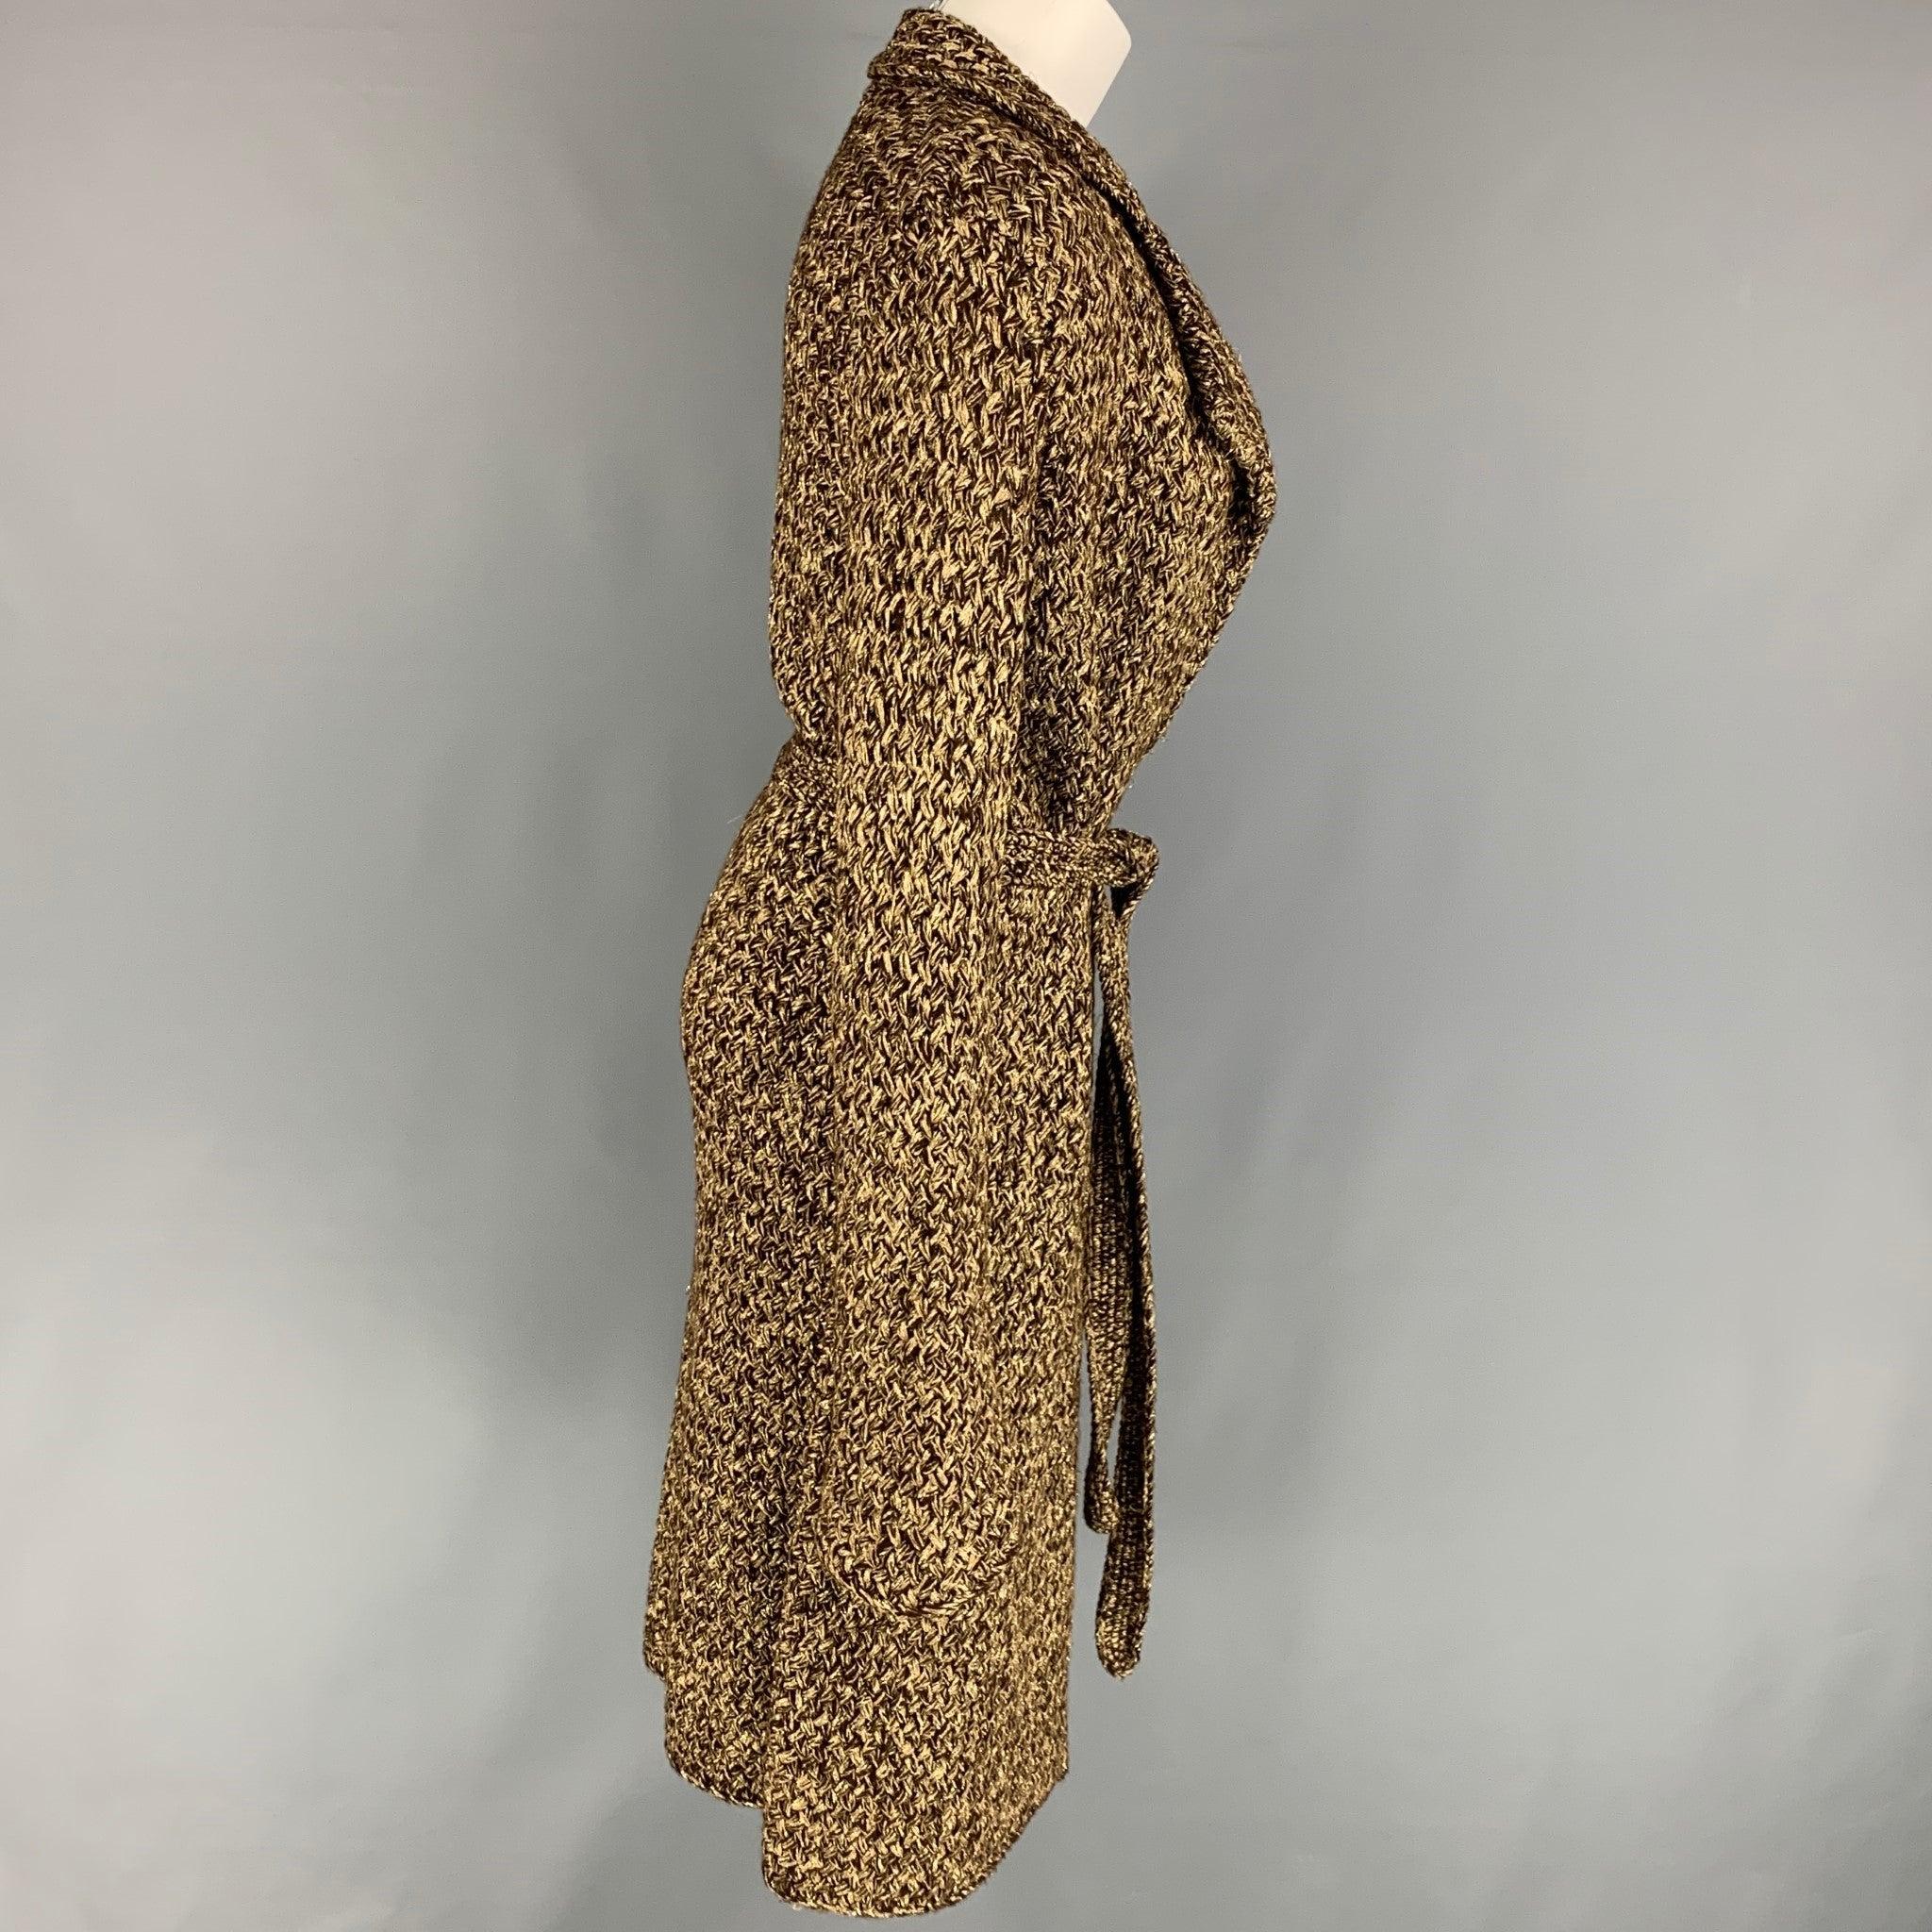 RALPH LAUREN 'Purple Label' coat comes in a brown & gold woven cashmere blend featuring a notch lapel, belted detail, and a open front.
Very Good
Pre-Owned Condition. 

Marked:   M  

Measurements: 
 
Shoulder: 14 inches  Bust: 38 inches  Sleeve: 29